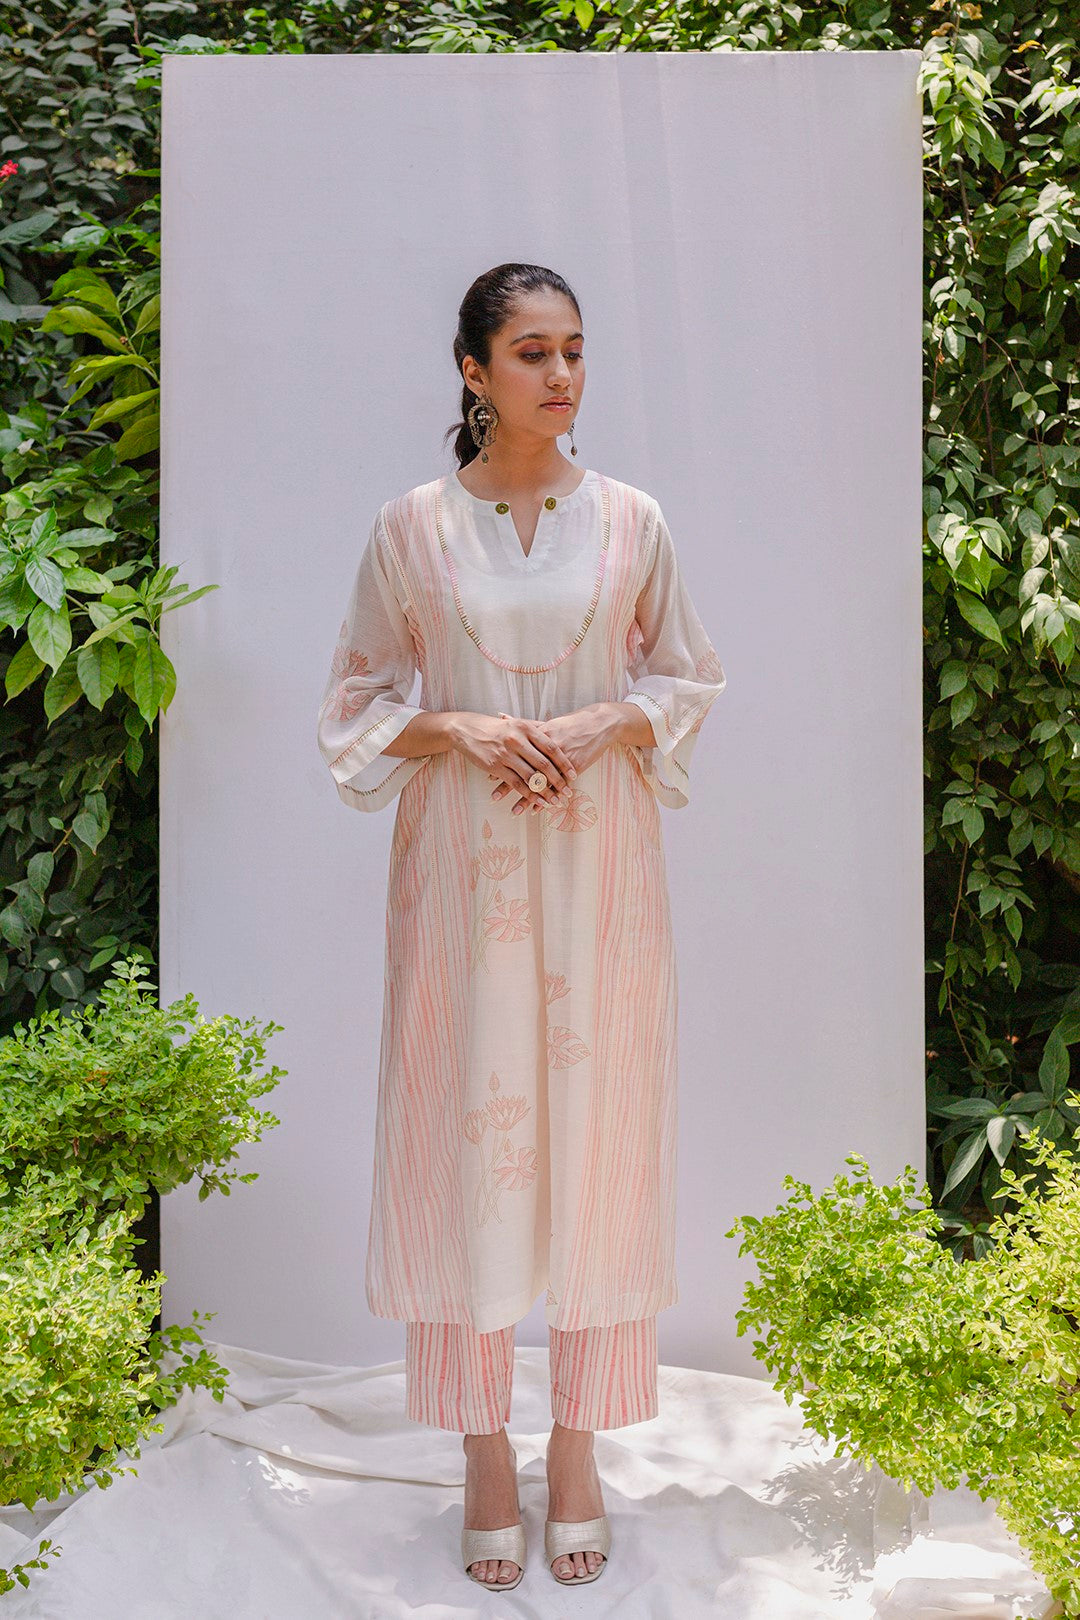 IVORY CHANDERI HAND BLOCK PRINTED FLORAL MOTIF WITH PINK STRIPE BLANKET STITCH YOKE KURTA WITH PRINTED PANTS AND LACE STOLE